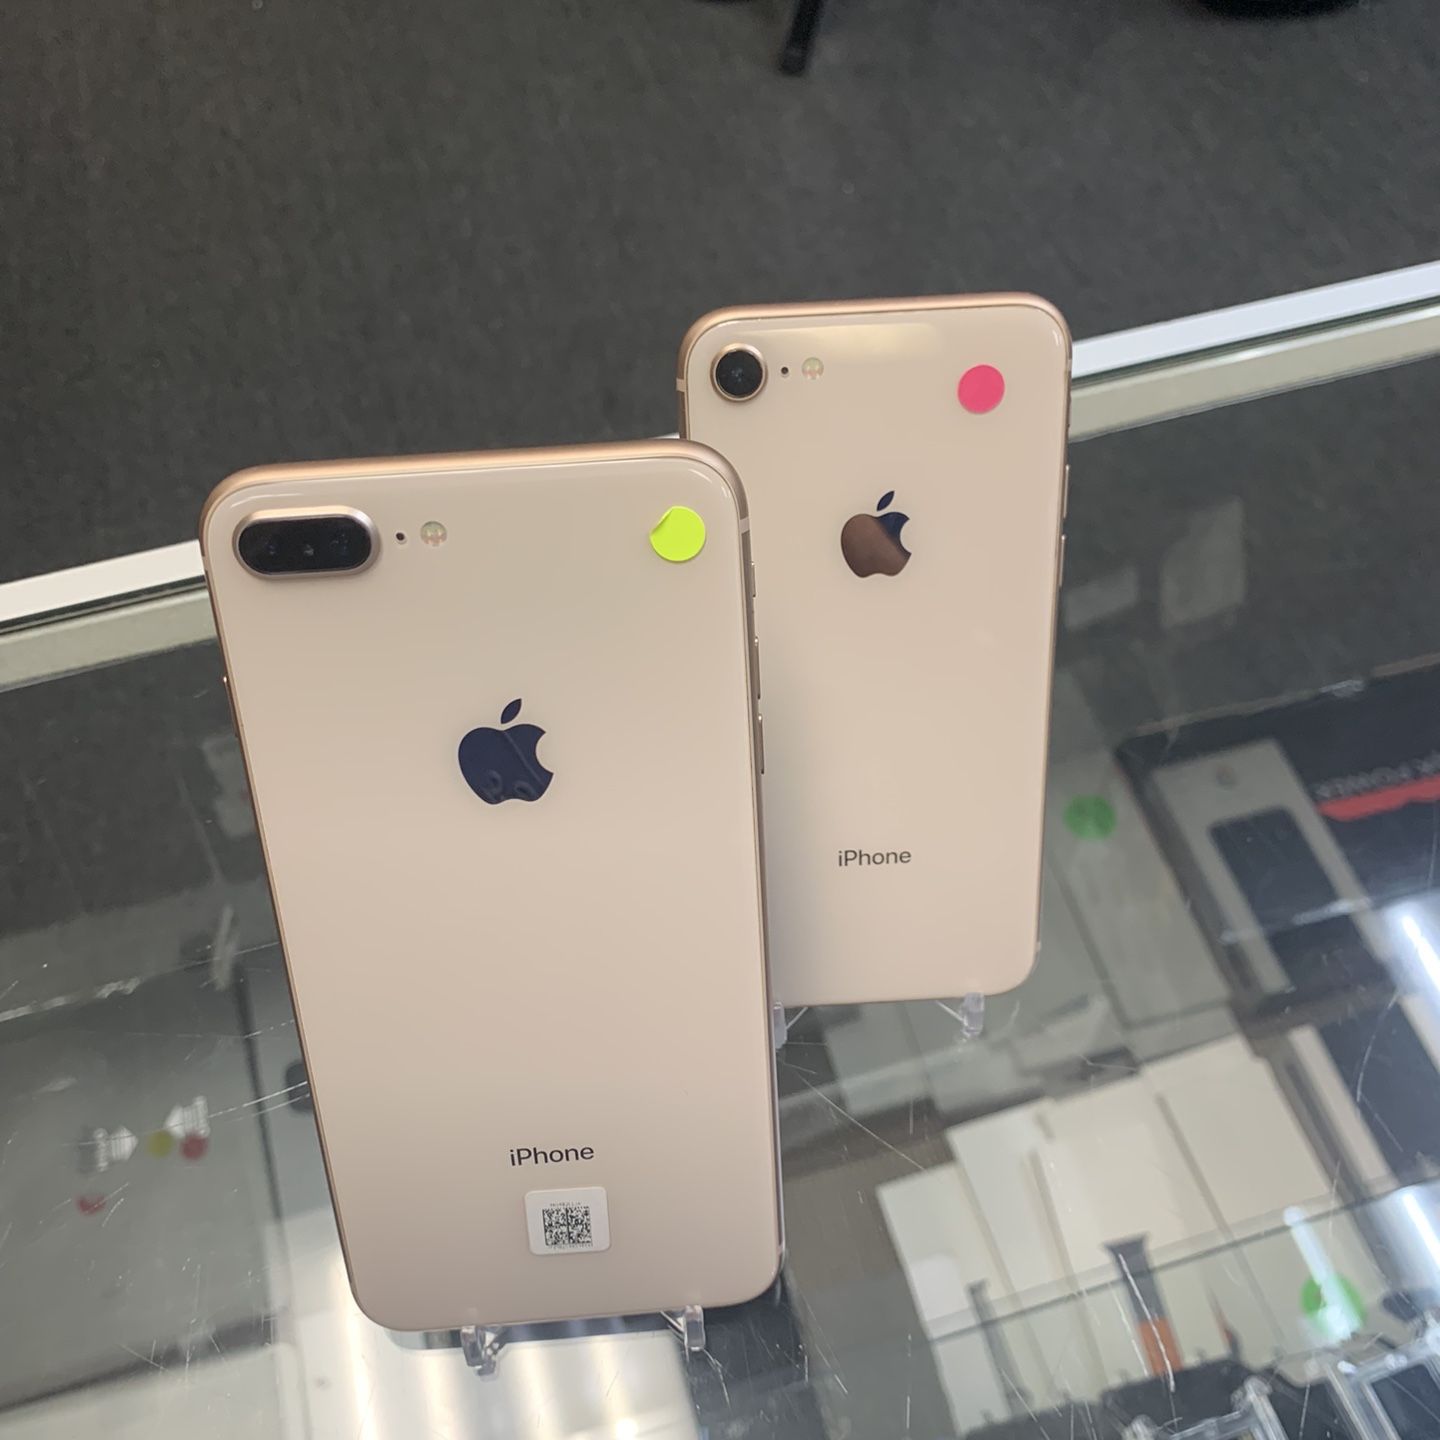 iPhone 8 / iPhone 8 Plus Unlocked, Special Offers